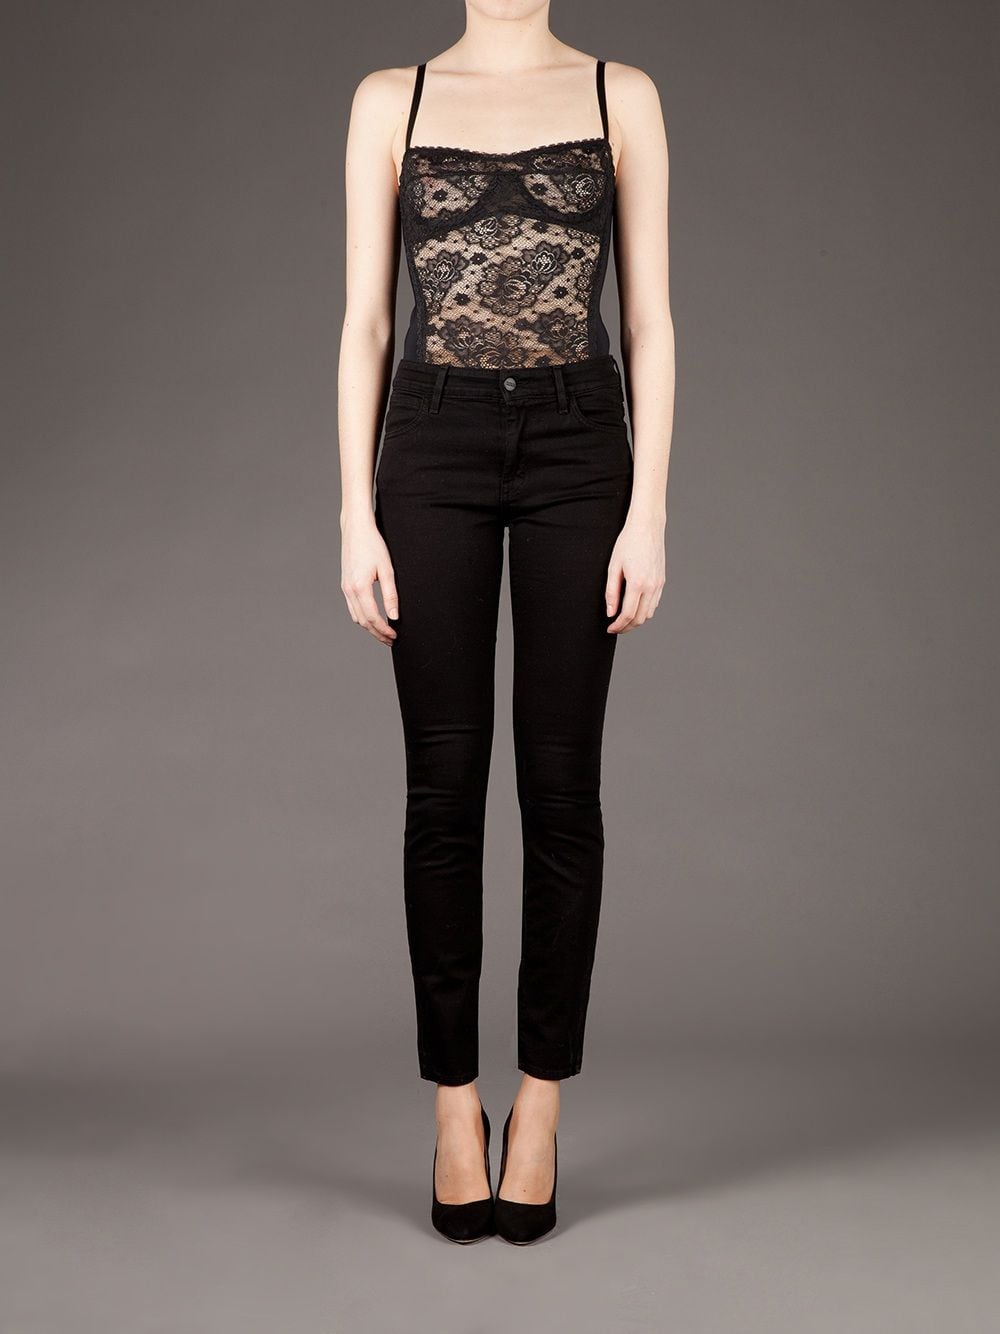 Image 2 of Golden Goose floral lace body